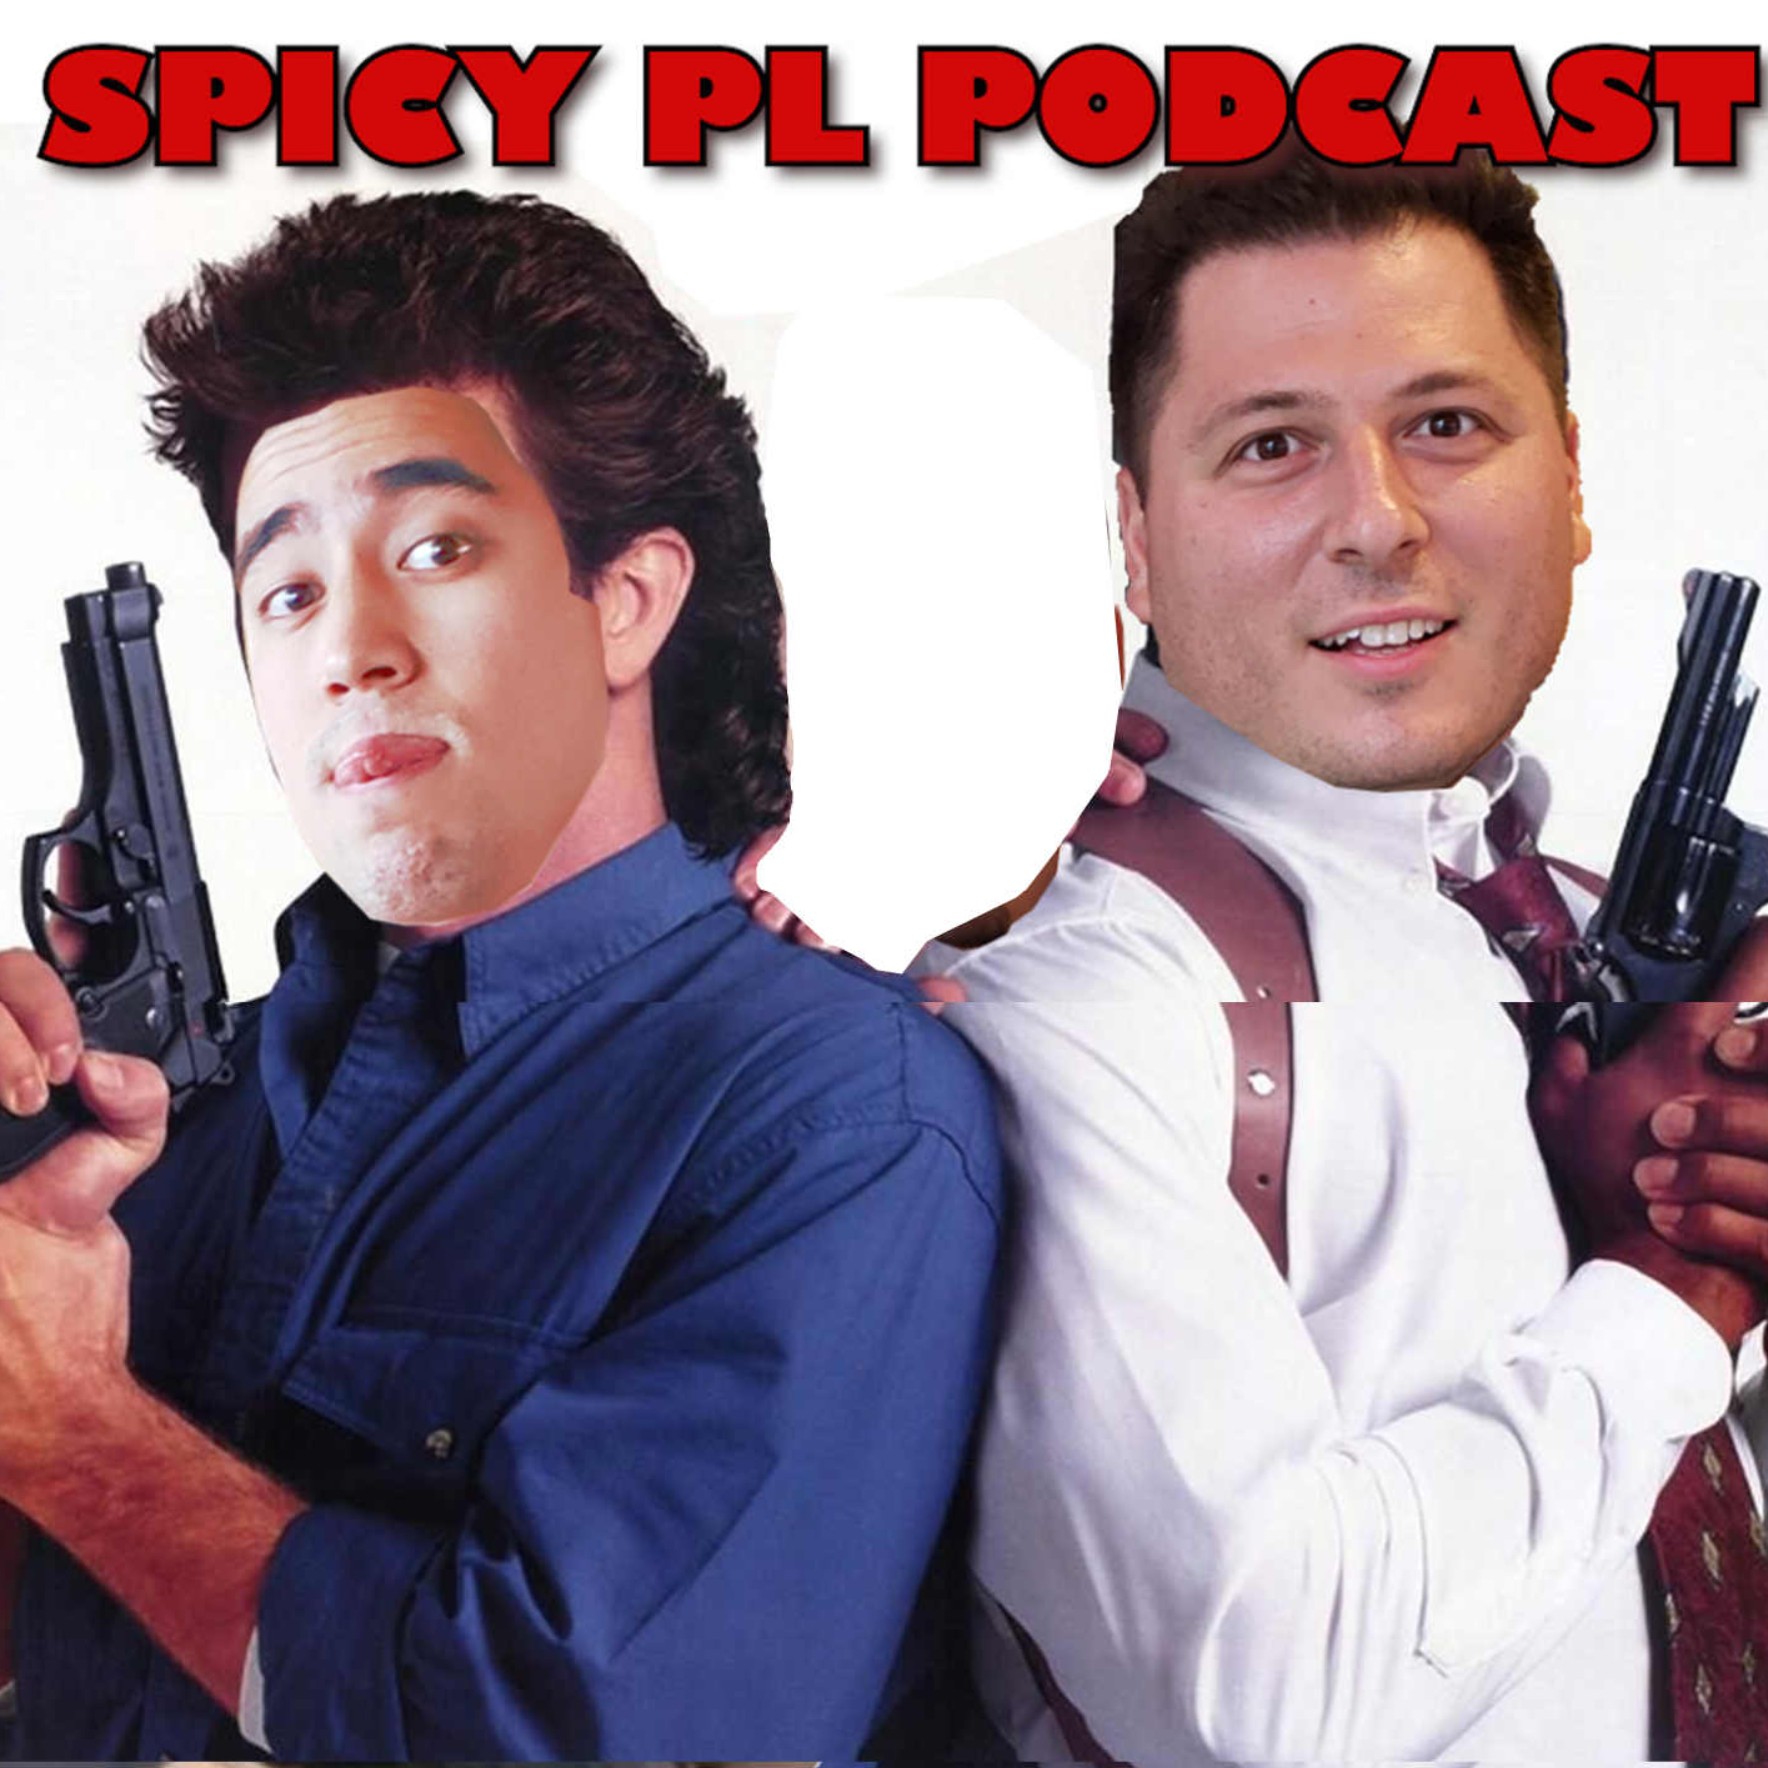 Spicy PL Podcast